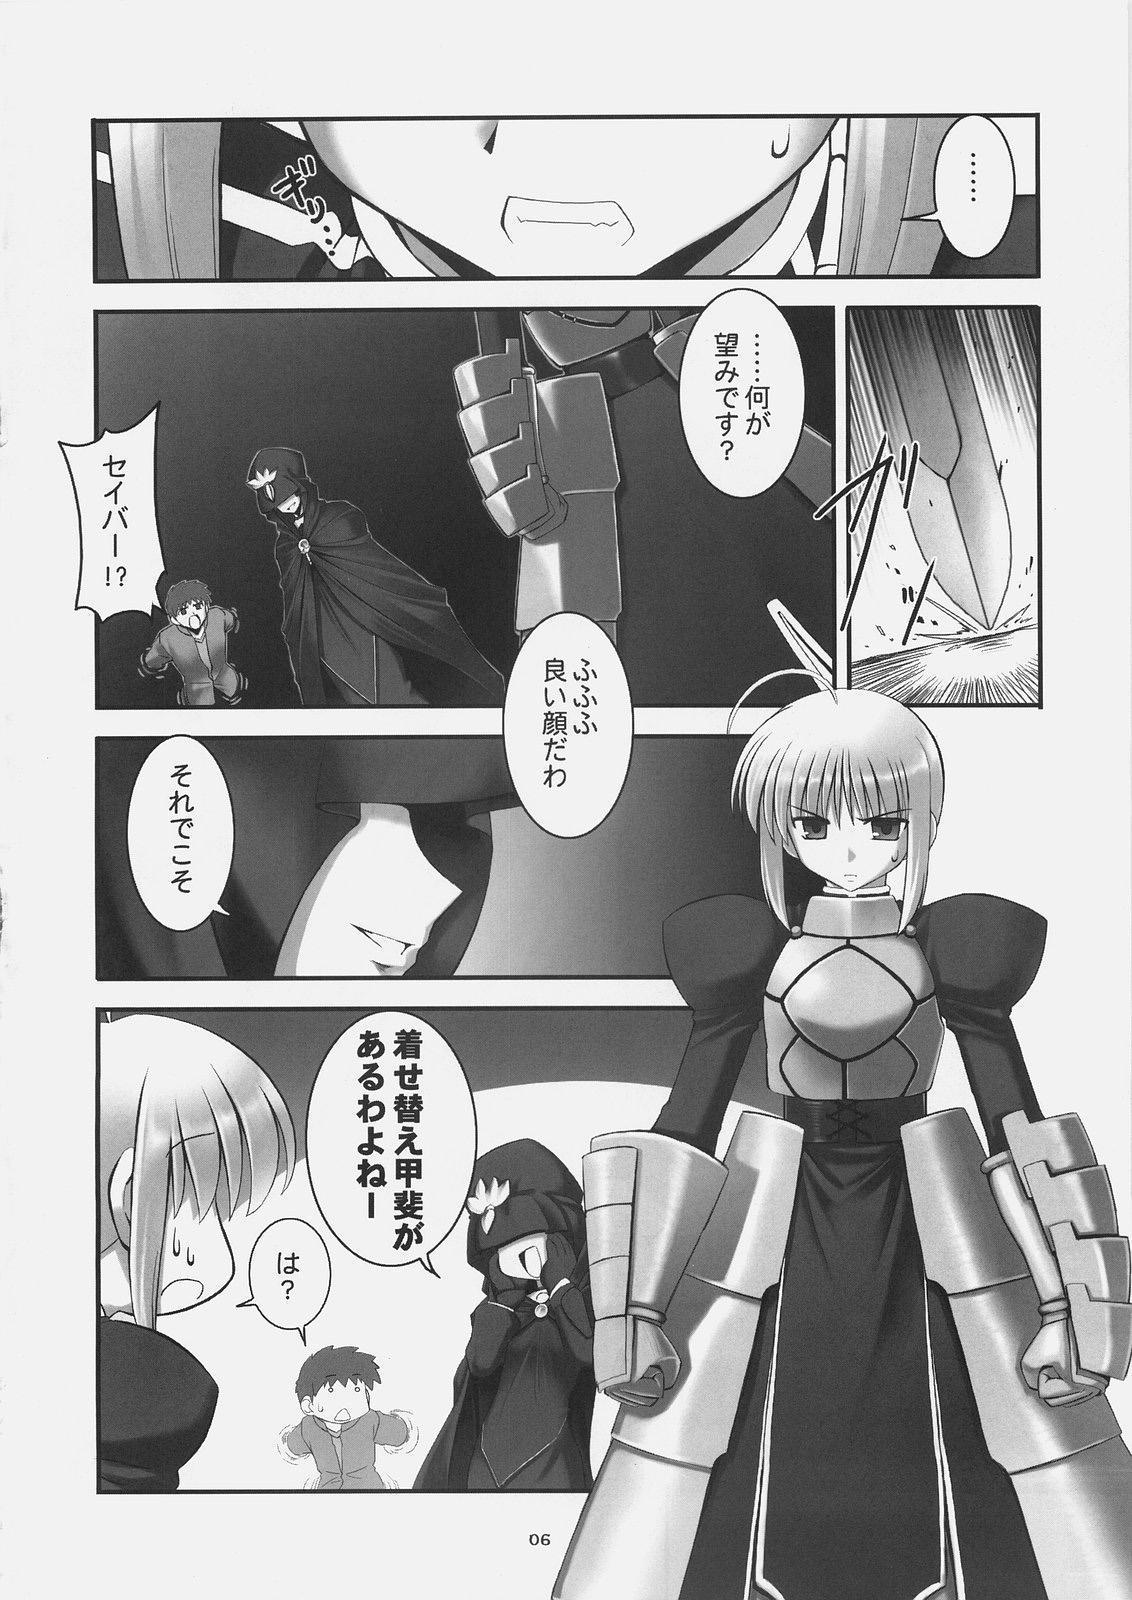 Stretch RE 01 - Fate stay night Scandal - Page 5